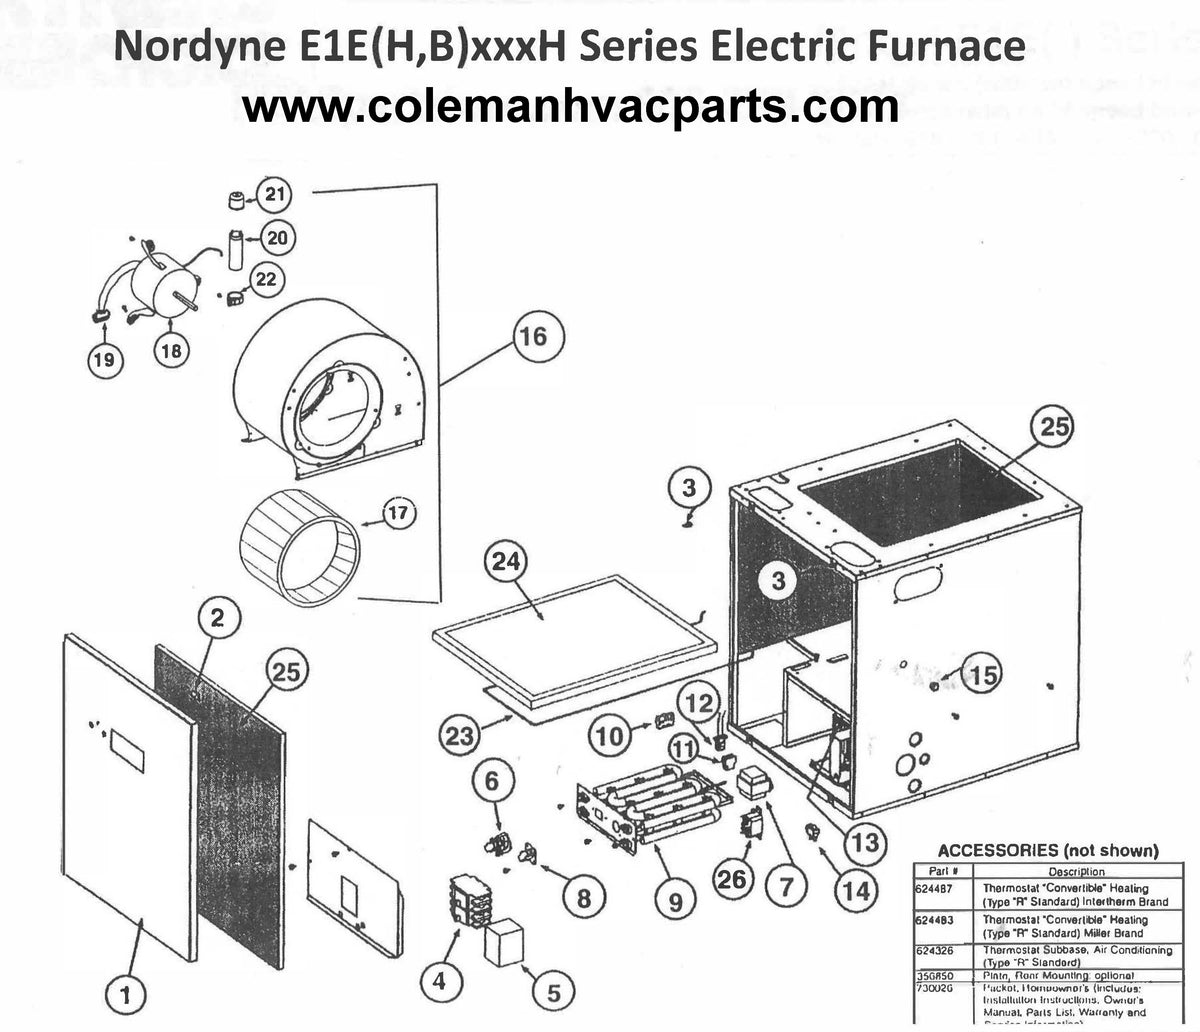 E1EH012H Nordyne Electric Furnace Parts – HVACpartstore york furnace wiring schematic 